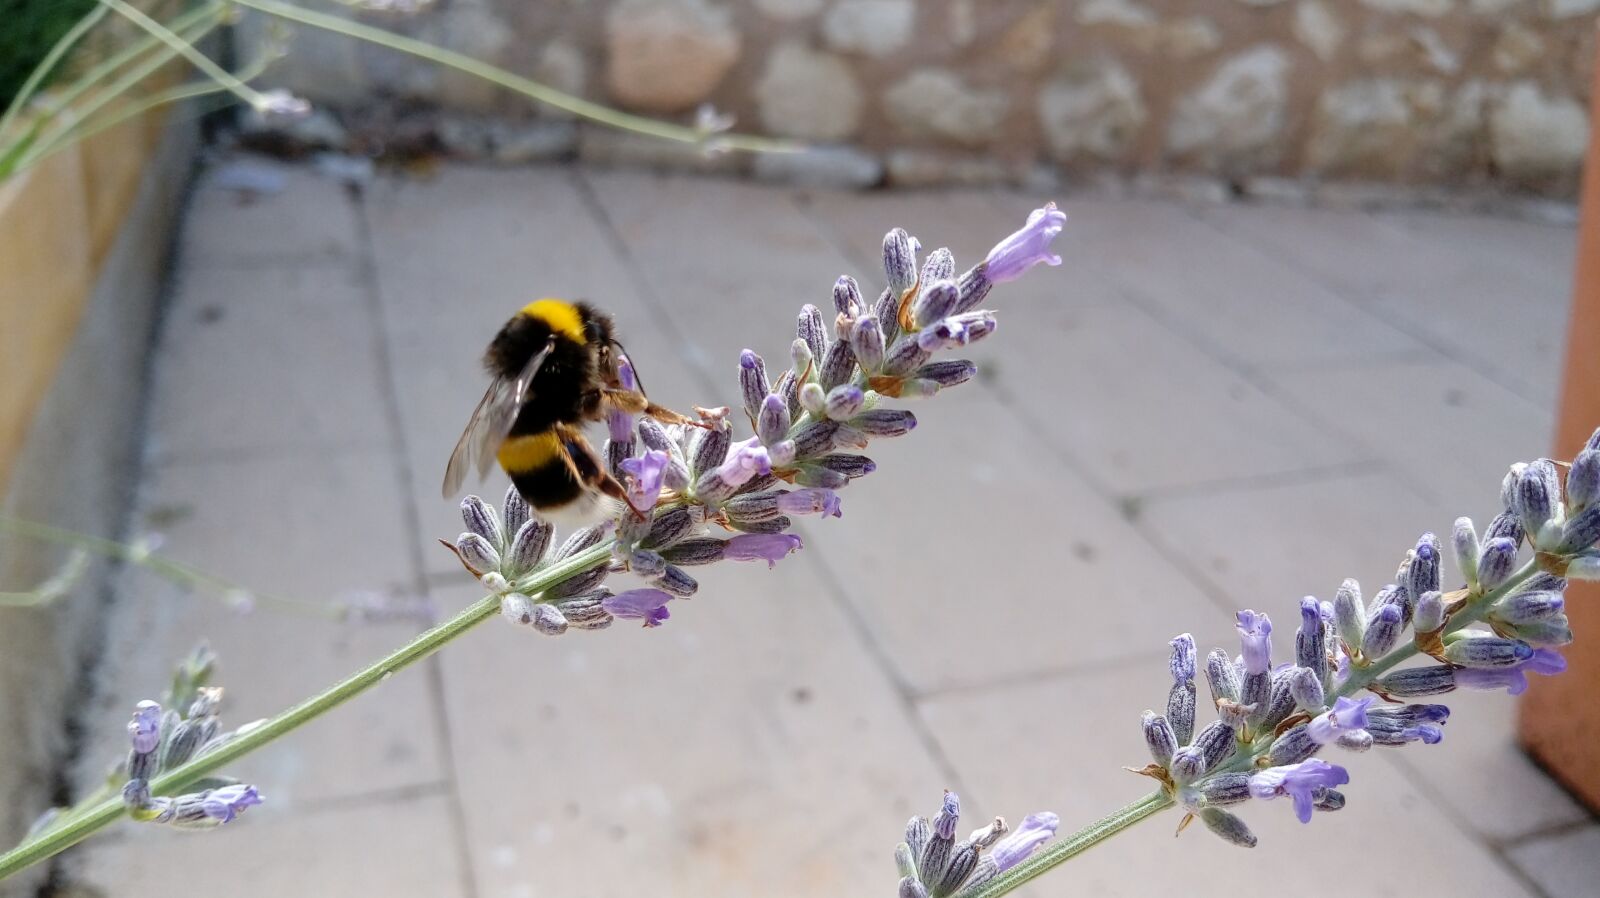 LG X POWER sample photo. Bumblebee, insect, pollination photography